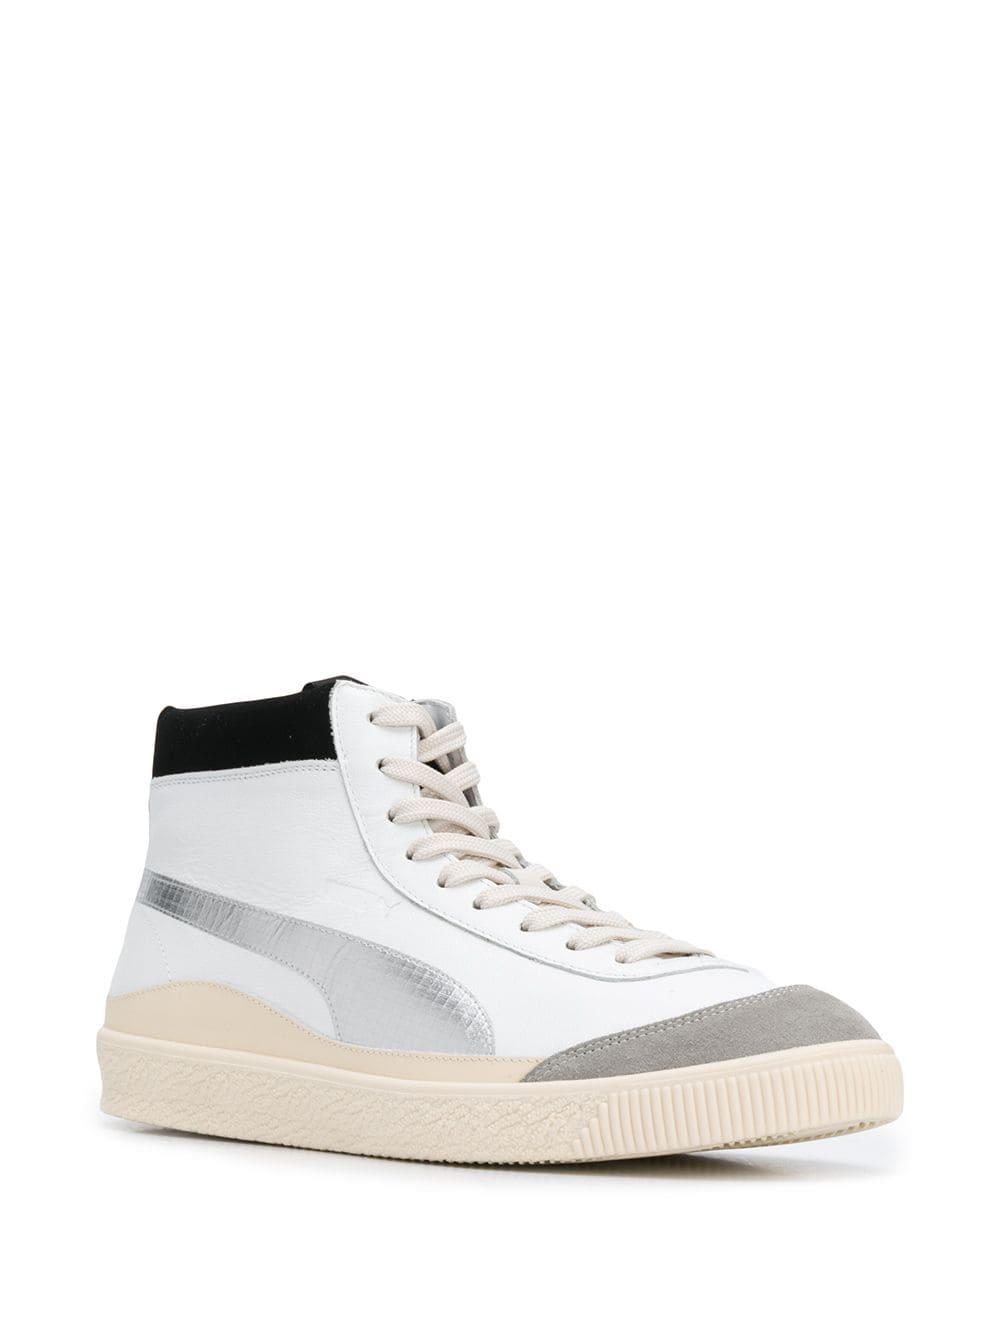 PUMA Leather X Rhude Basket '68 Og Mid Sneakers in White for Men | Lyst